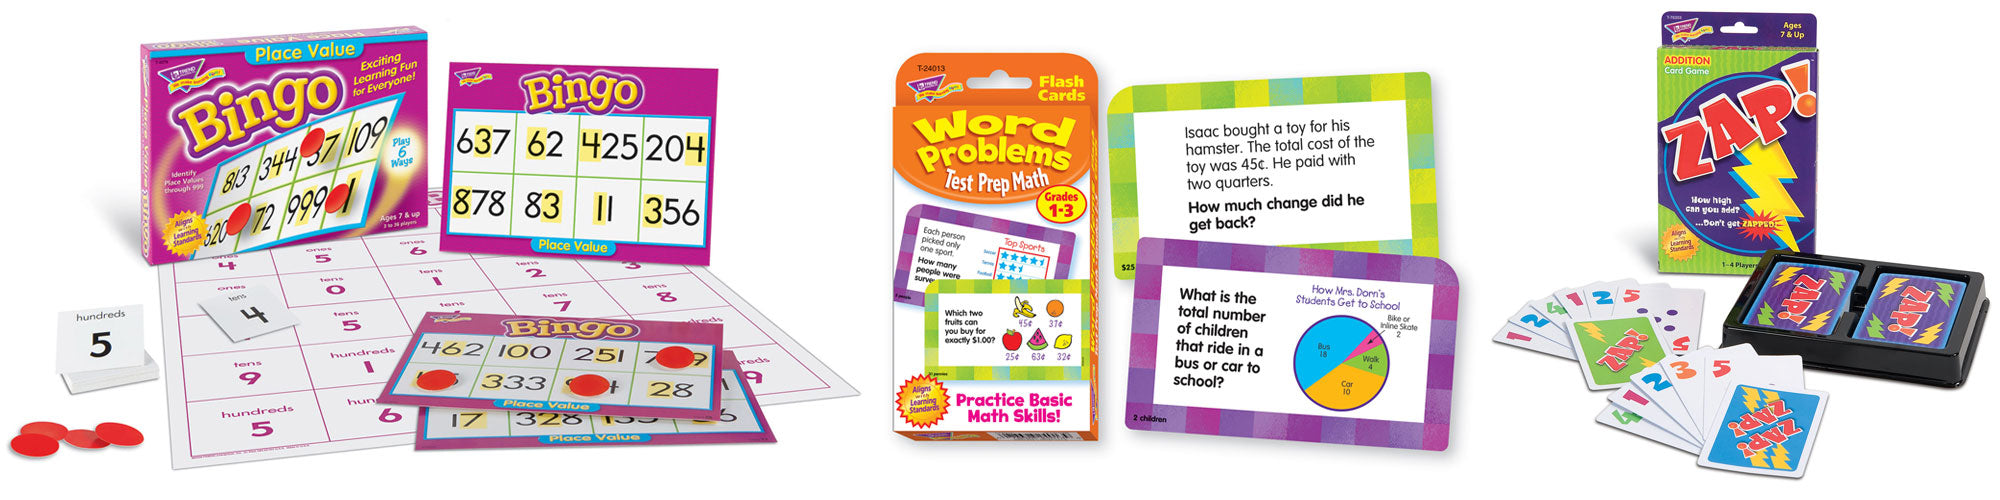 Products for 2nd grade math skills practice